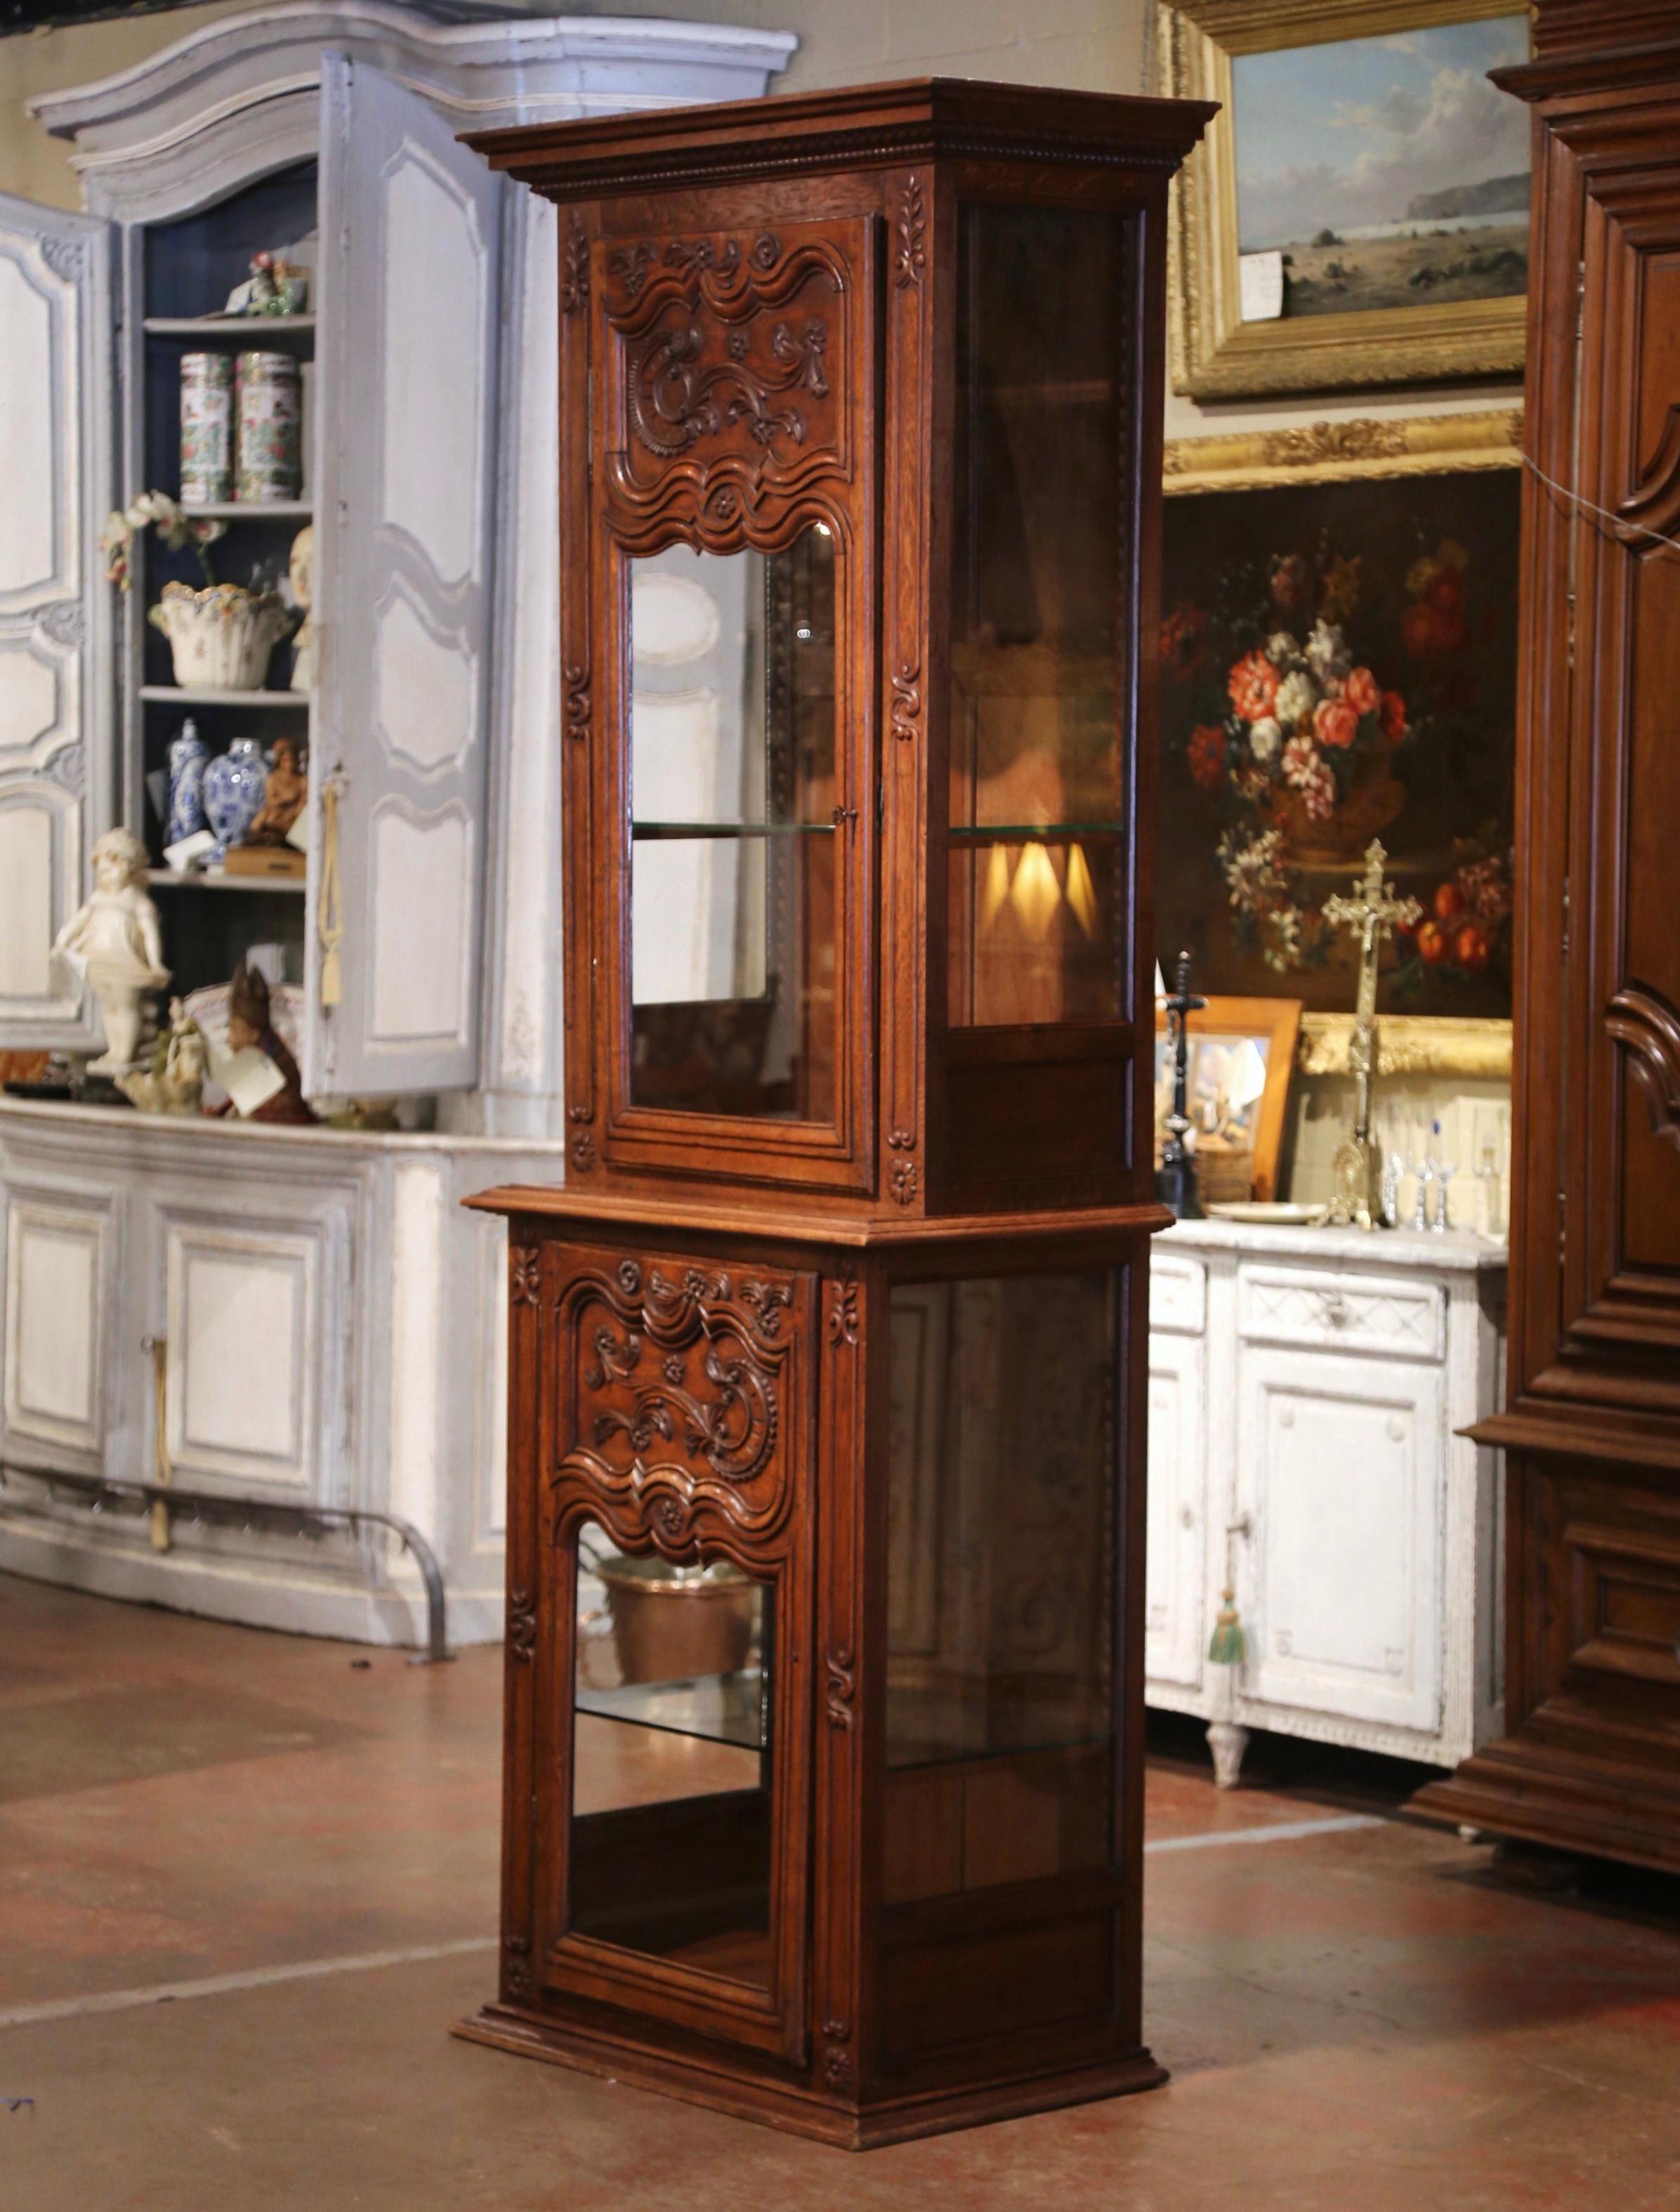 Hand crafted in Normandy, northern France circa 1870, and built in two sections, the antique oak and glass cabinet stands on a thick bottom plinth, and dressed at the pediment with a large carved decorative cornice. Each section features side glass